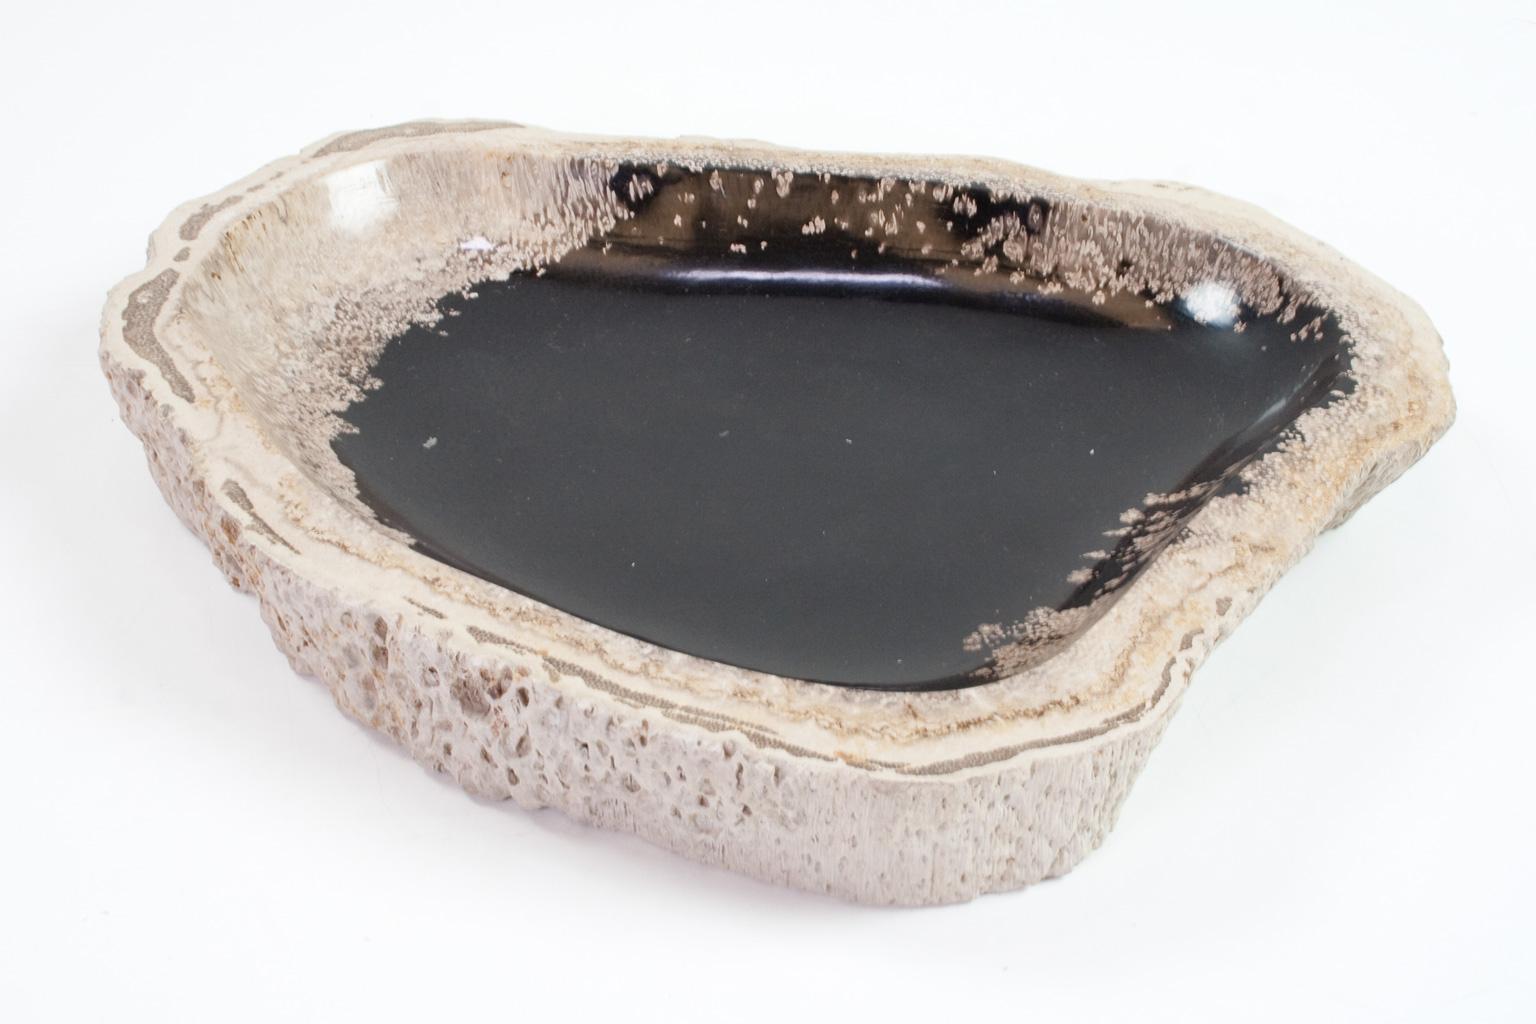 Petrified wooden bowl, smooth sanded and polished on the inside. The beige and white, outside stands out against the anthracite / charcoal, which, together with the organic shape make this an elegant item. The objects still hold the organic and